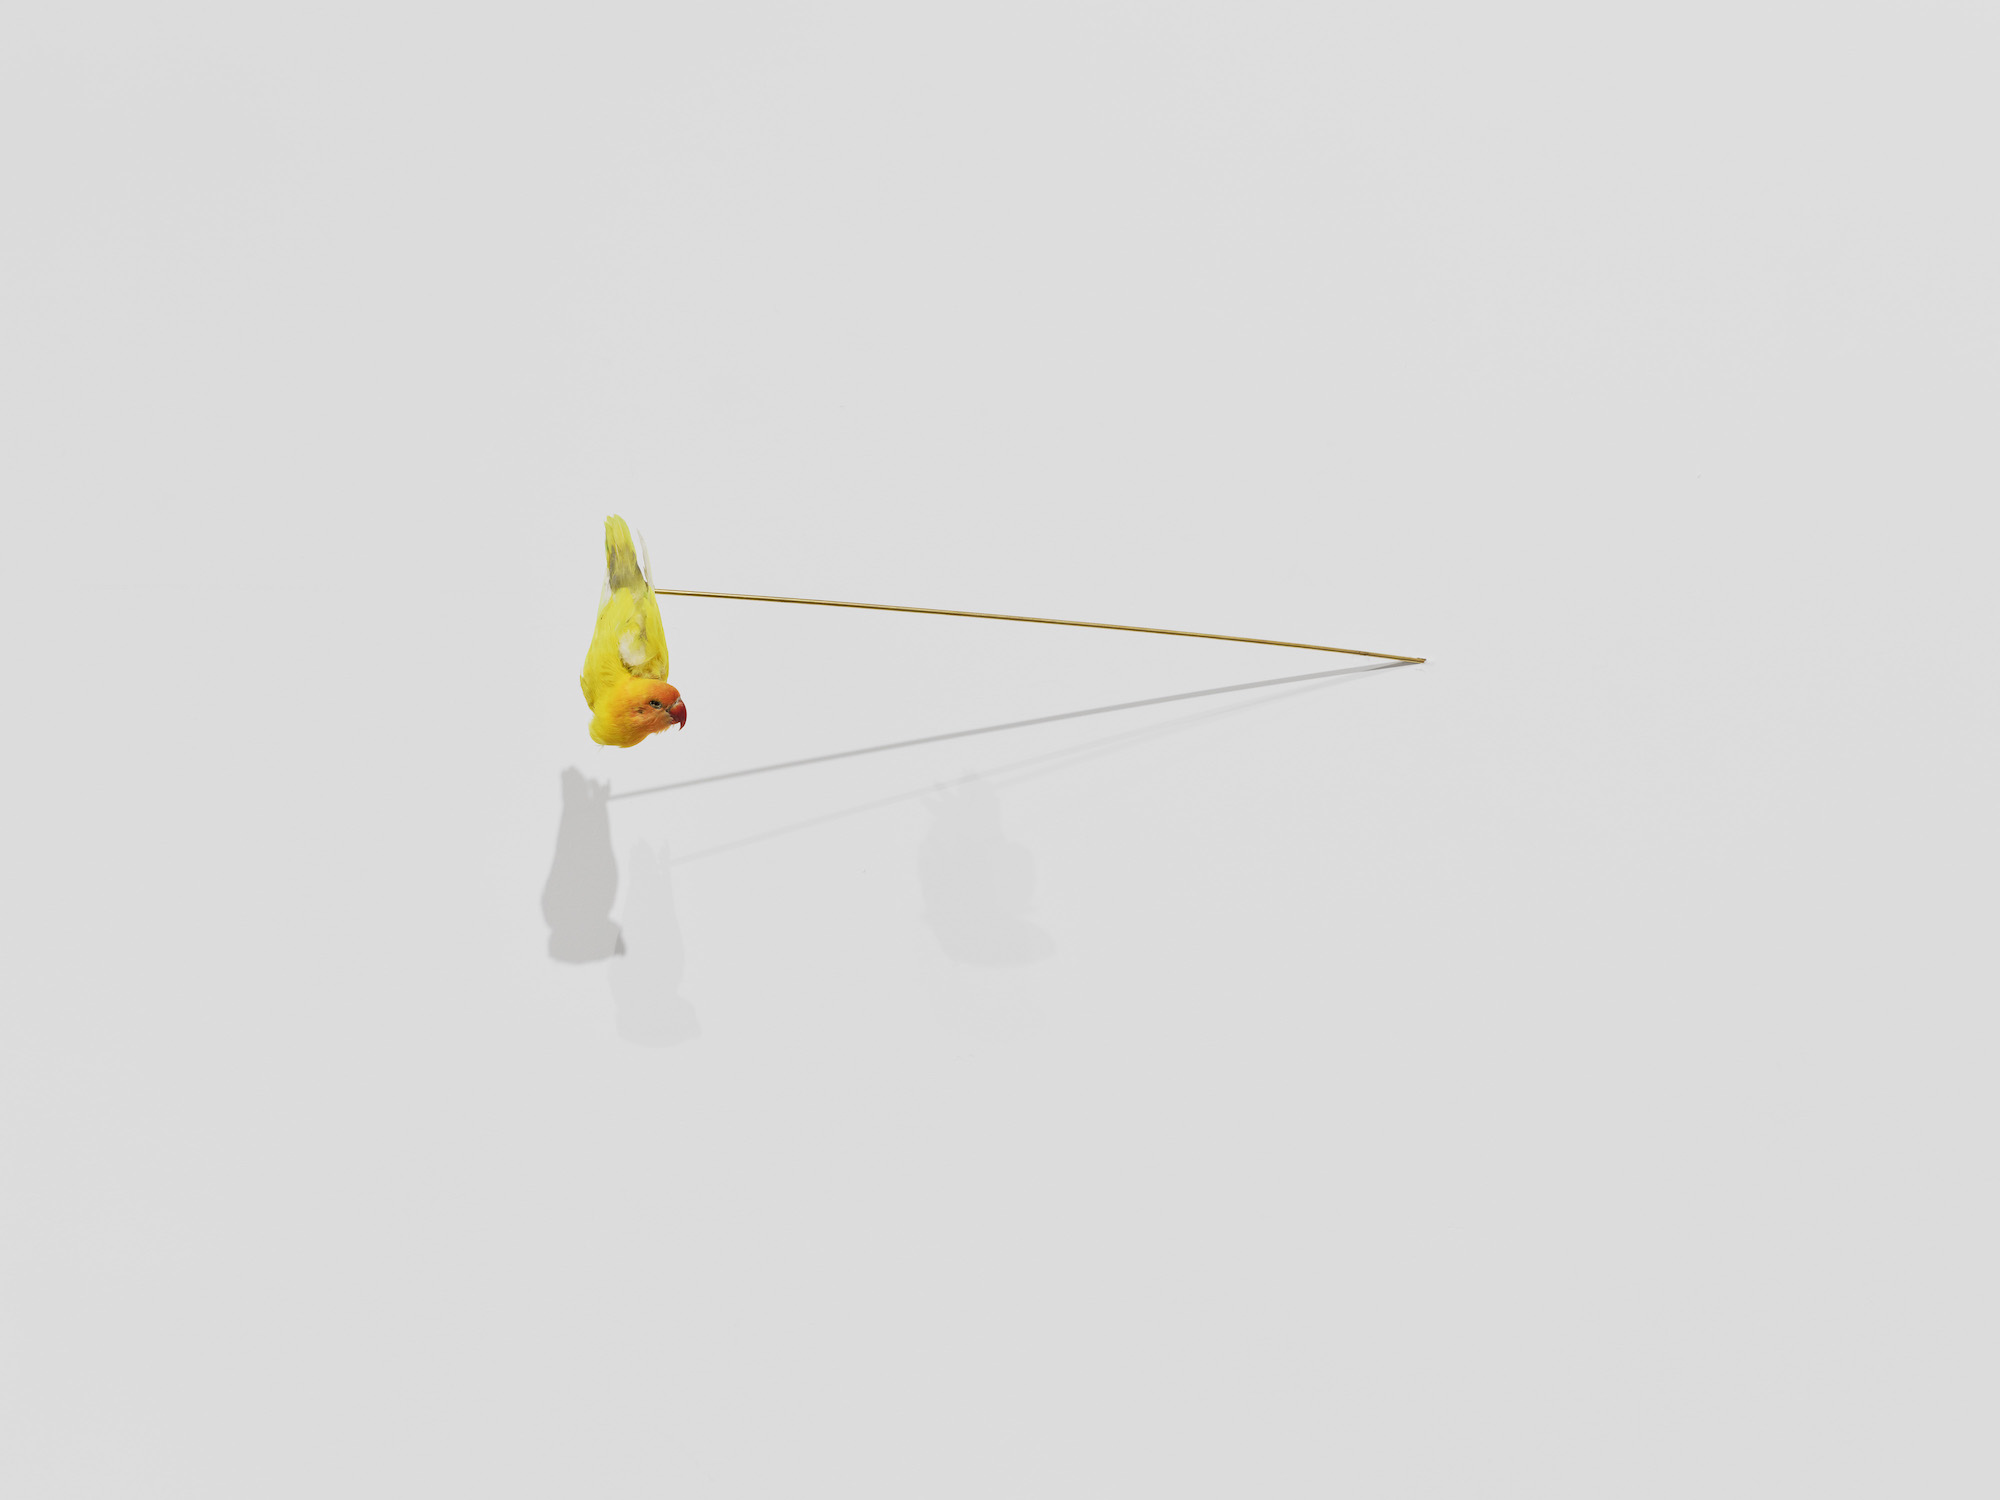 Against a blank white wall a brass bar protrudes and holds a dangling yellow parakeet